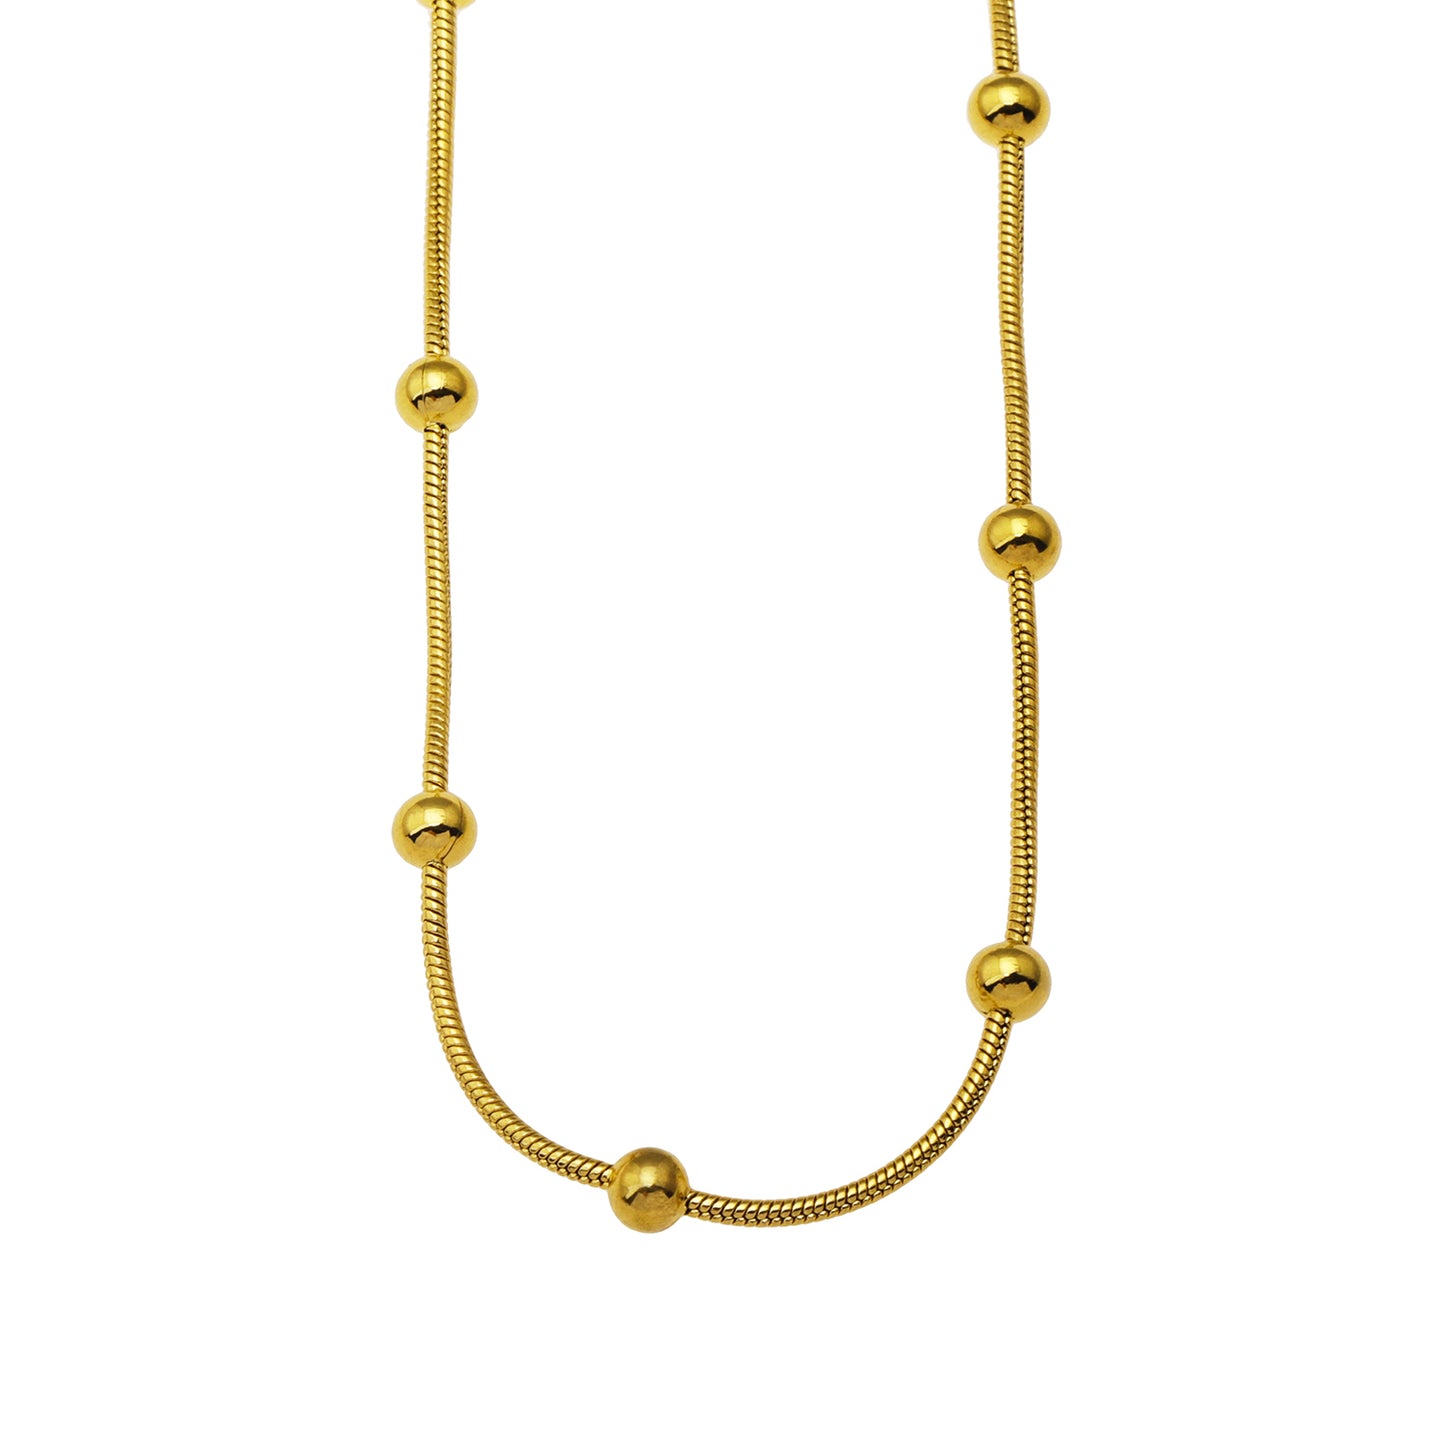 hackneynine | hackney-nine Style MAKARIA 10095: Snake-Skin Textured Chain Necklace with Ball Shaped Beads